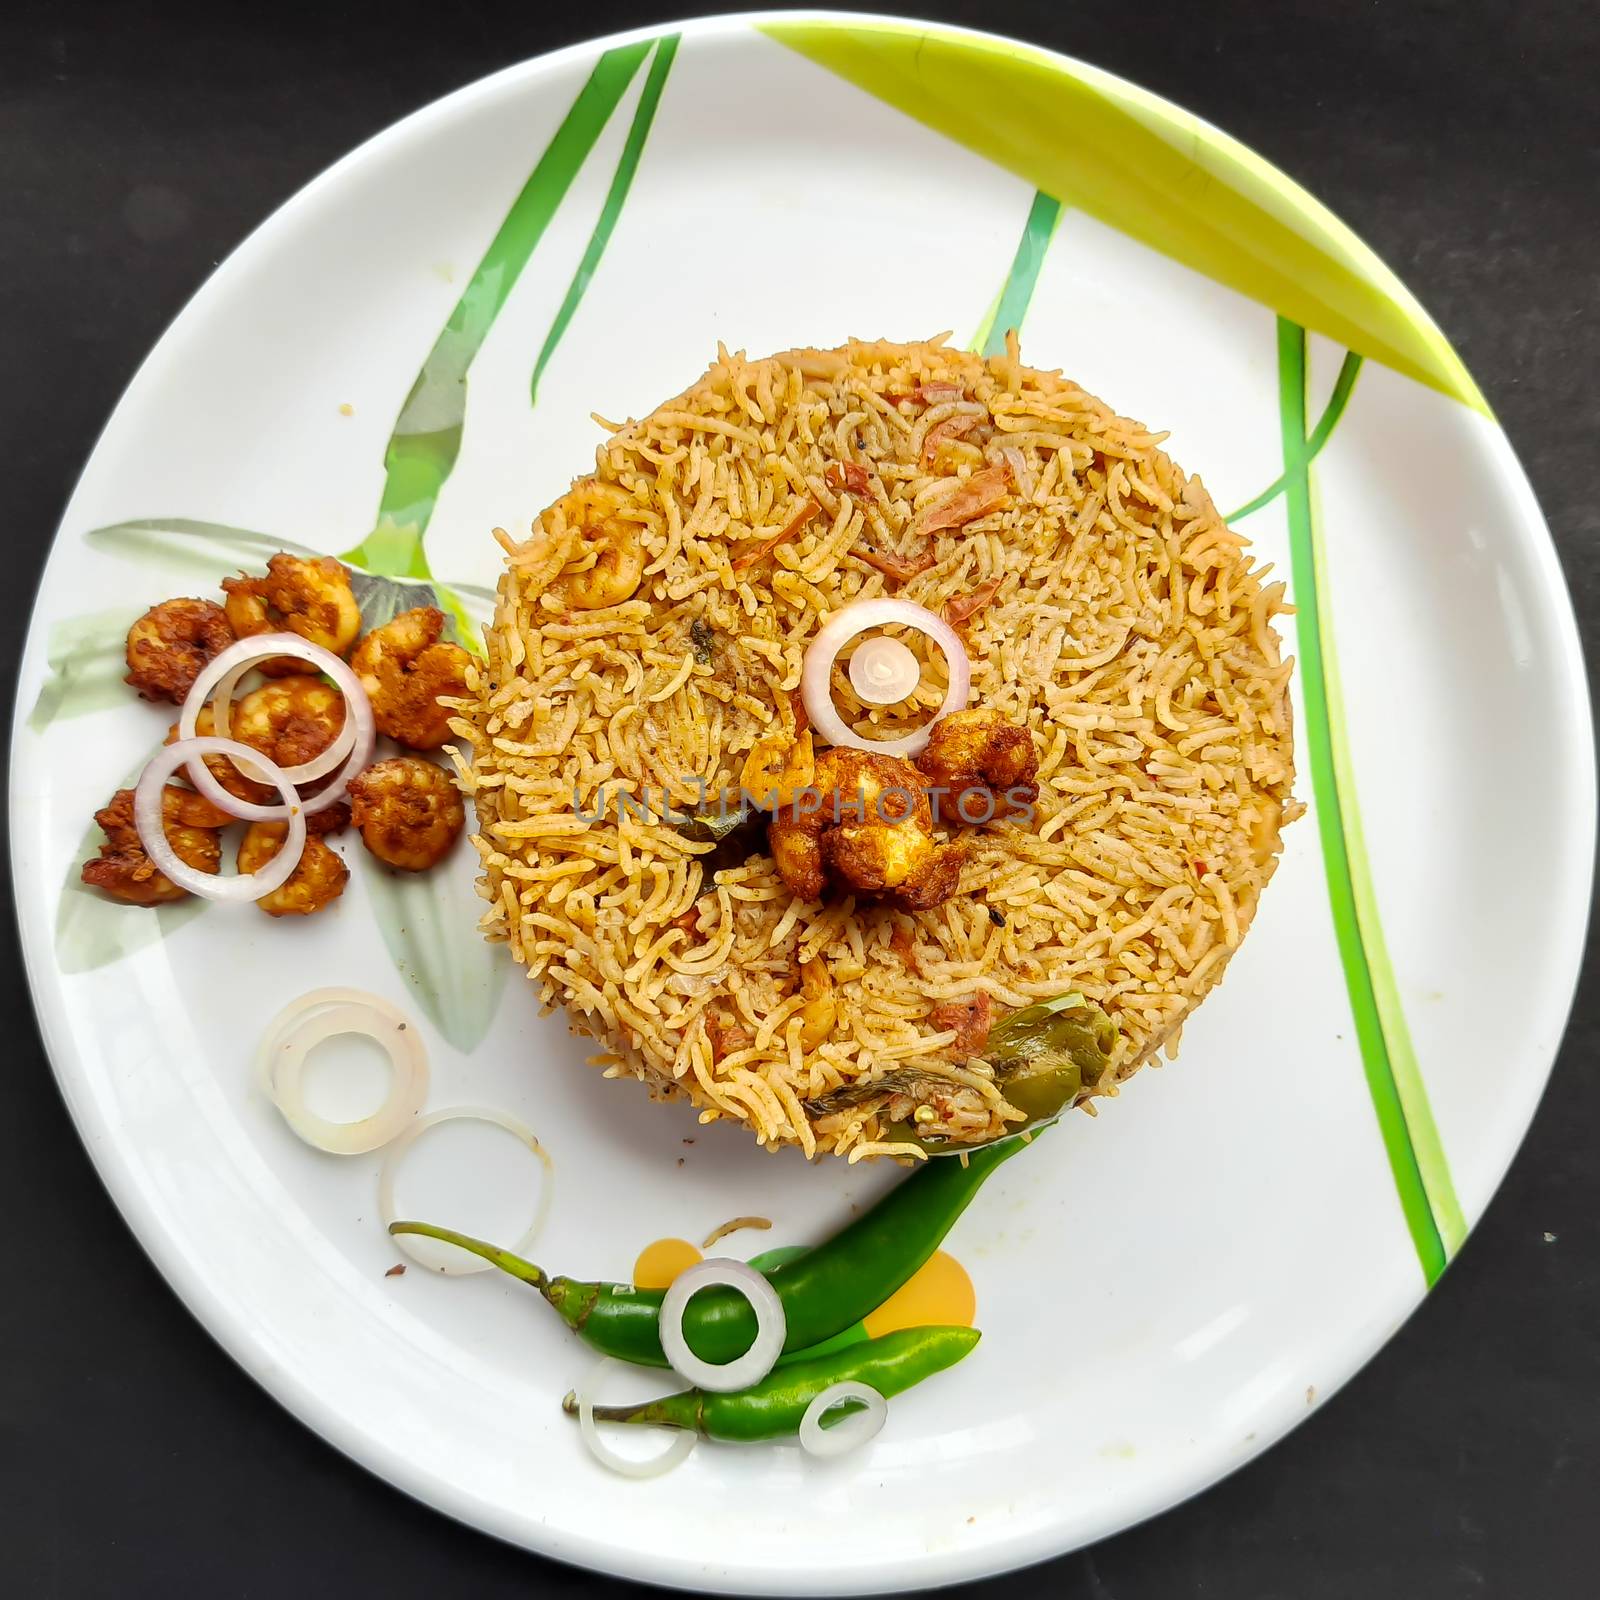 Colorful Delicious yummy prawn briyani with prawn fry in center with prawn fry and raita plated beautifully in white plate with bayleaf and it's one of favorite restaurant cuisine food by AnithaVikram